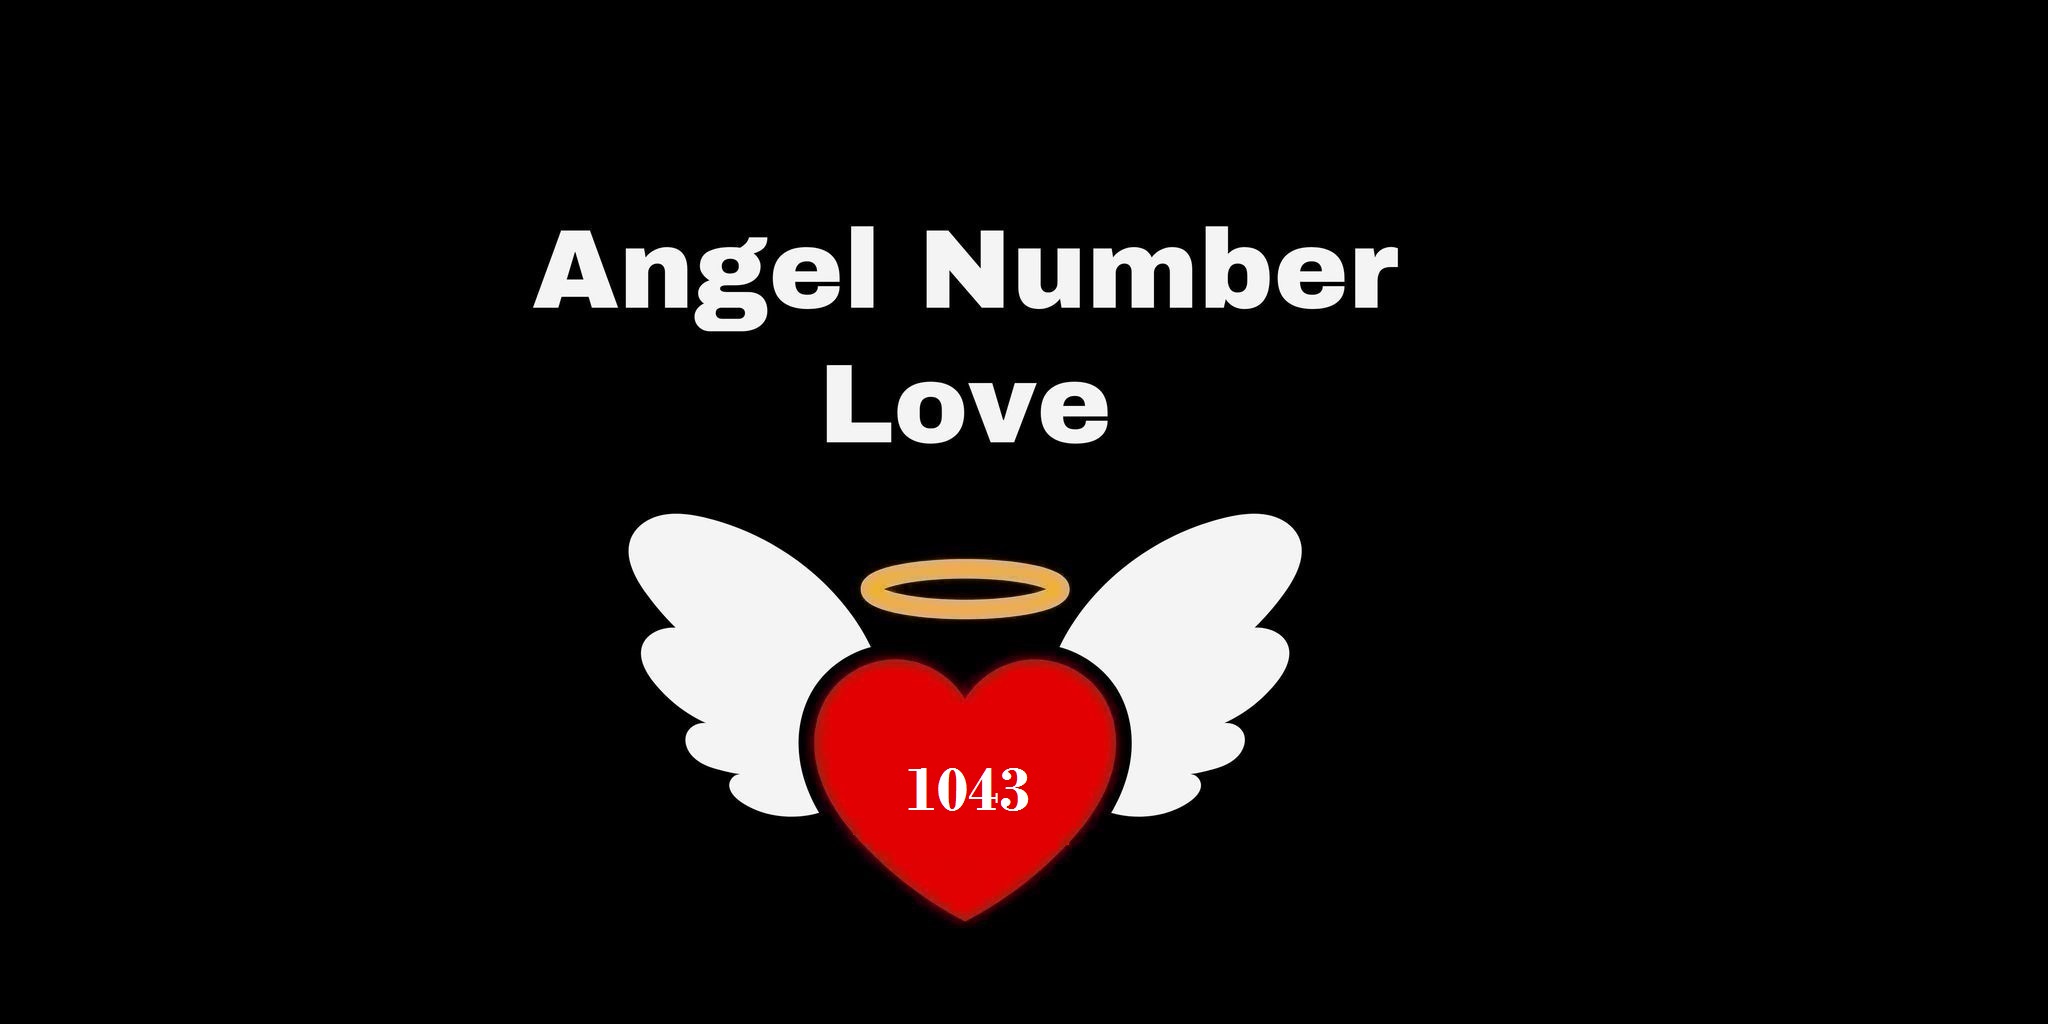 1043 Angel Number Meaning In Love